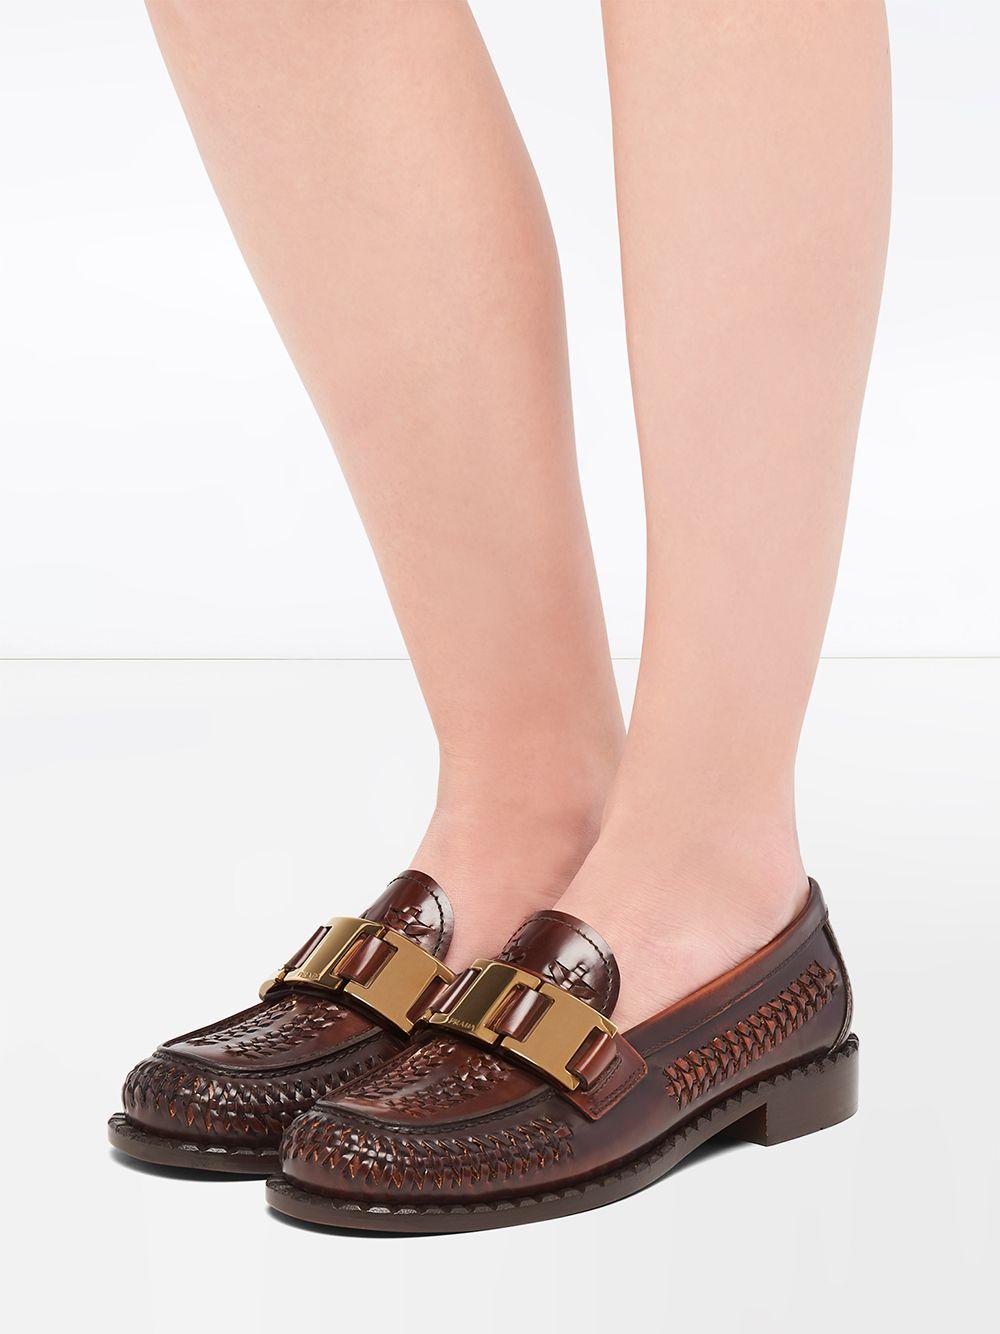 Prada Buckled Woven Loafers in Brown | Lyst